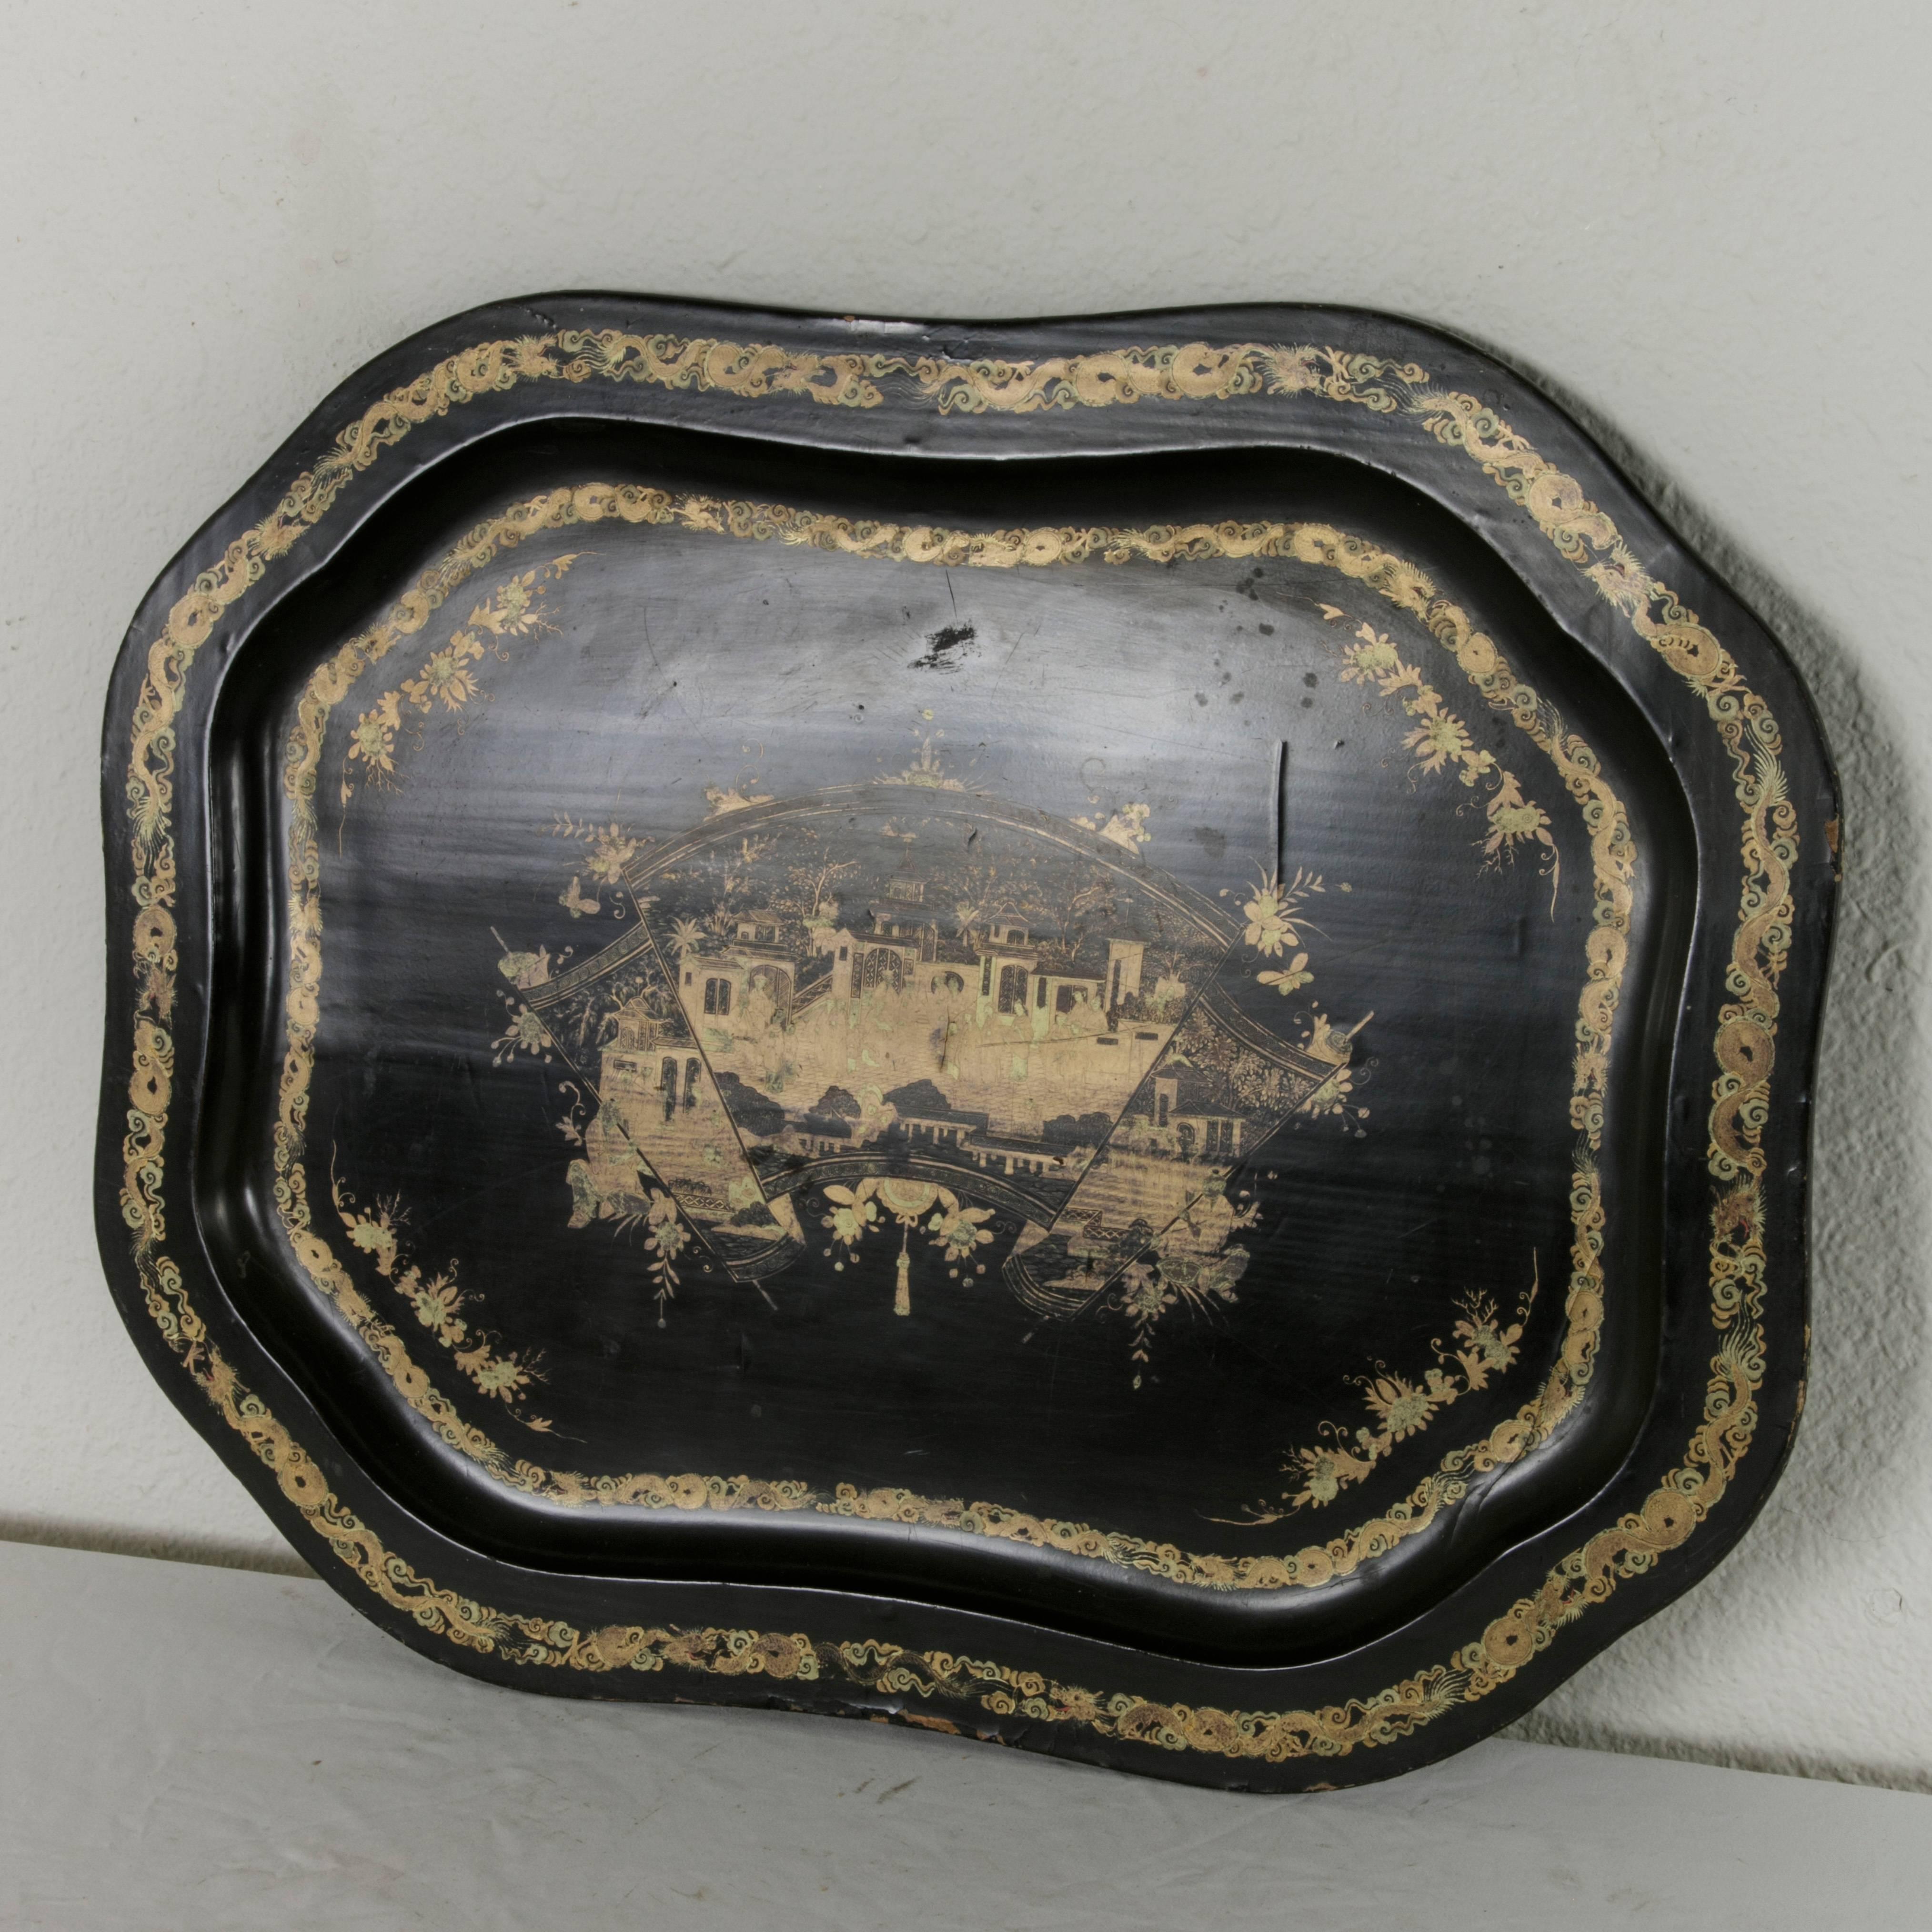 Hand-Painted Large 19th Century Chinese Export Black Lacquer Wooden Serving Tray